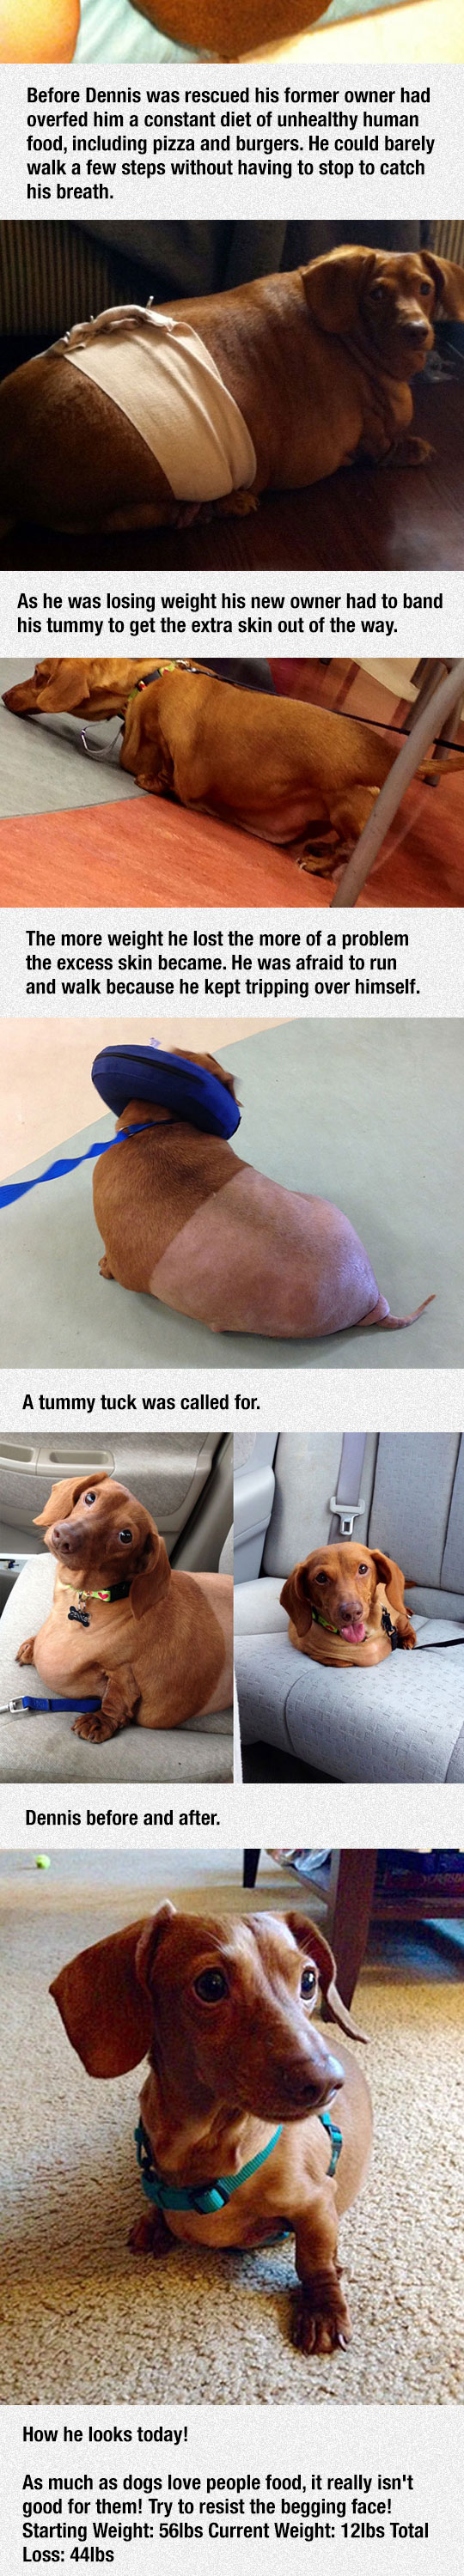 cool-dieting-fat-dog-surgery